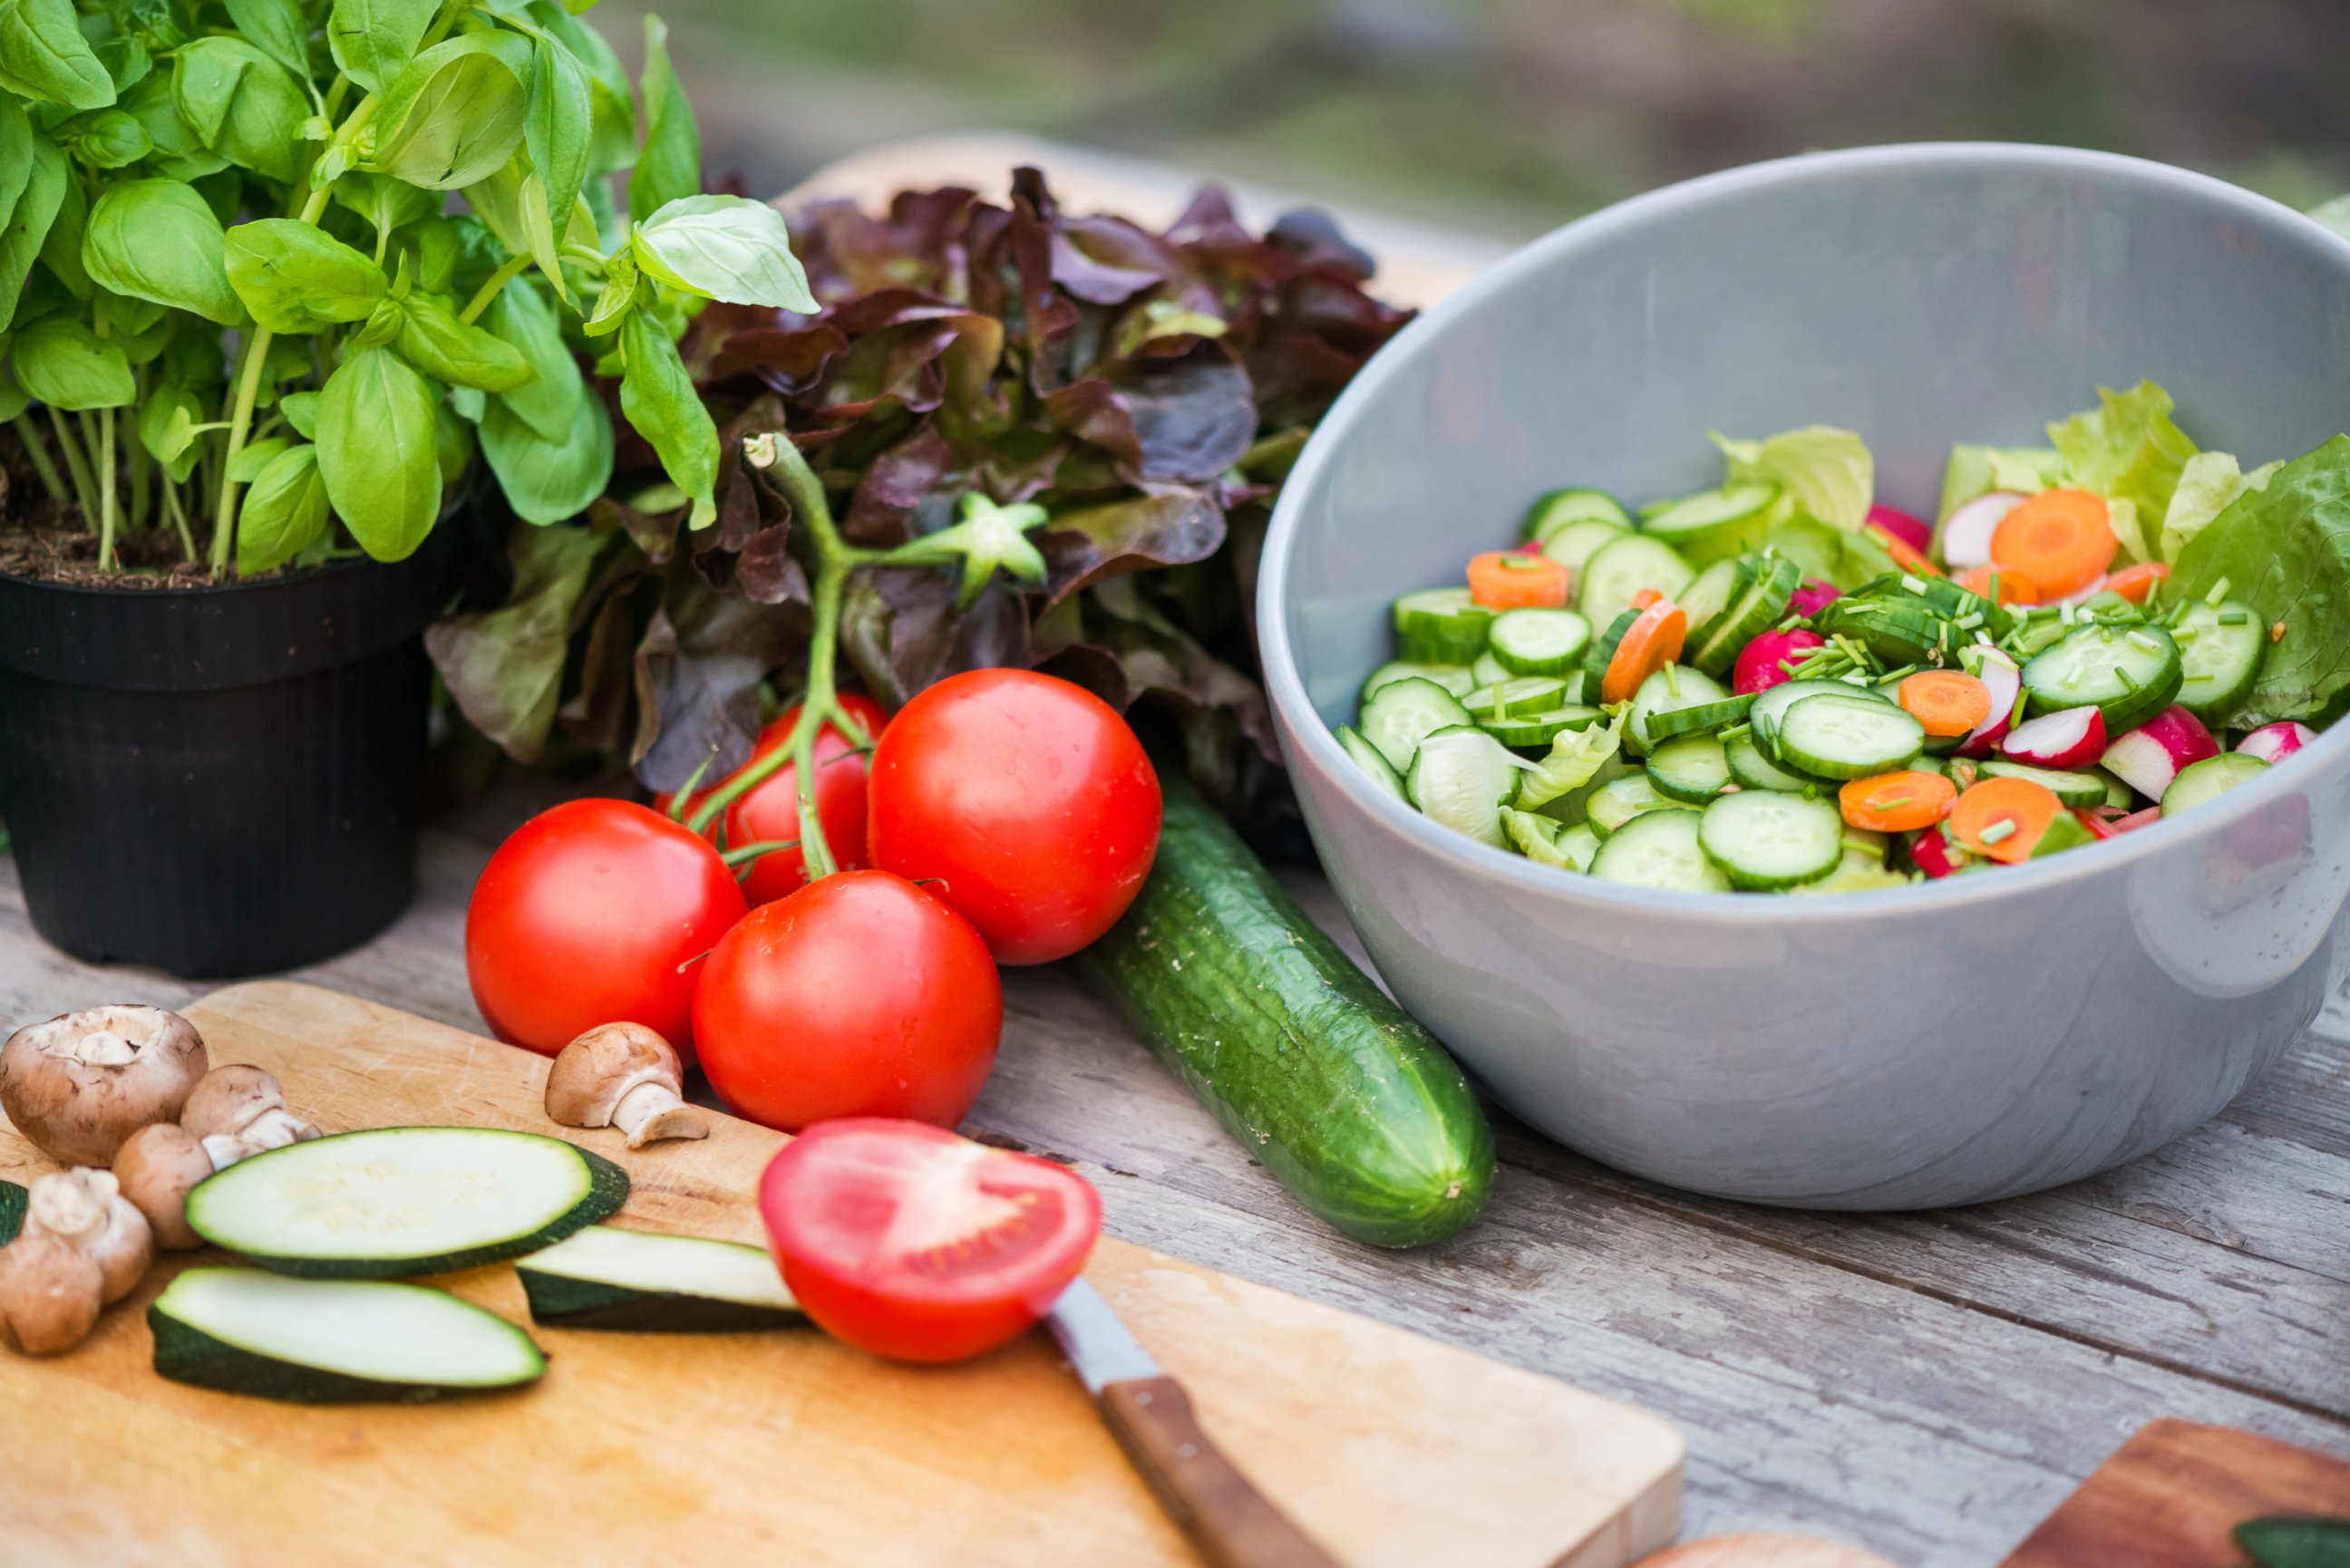 PHOTO: Fresh vegetables are visible on a cutting board in this stock photo.